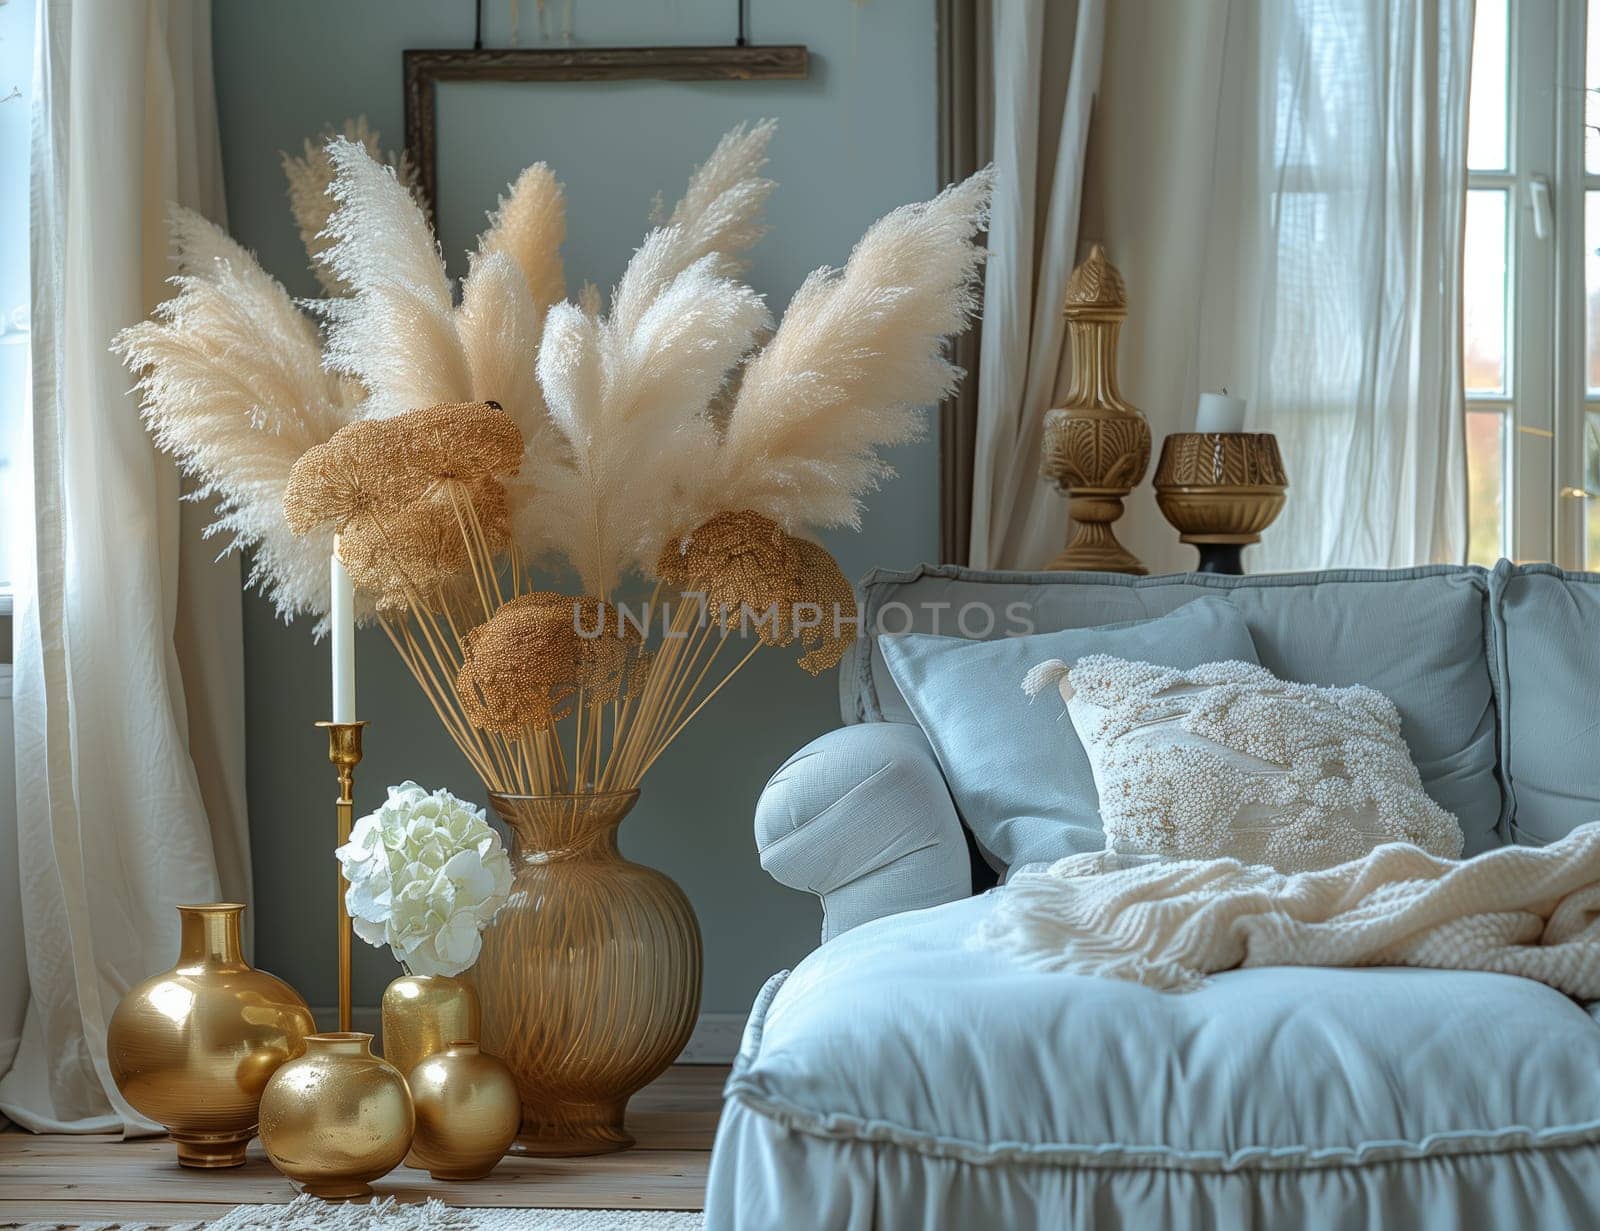 Comfortable living room with couch, vases, candles, pampas grass and art by richwolf